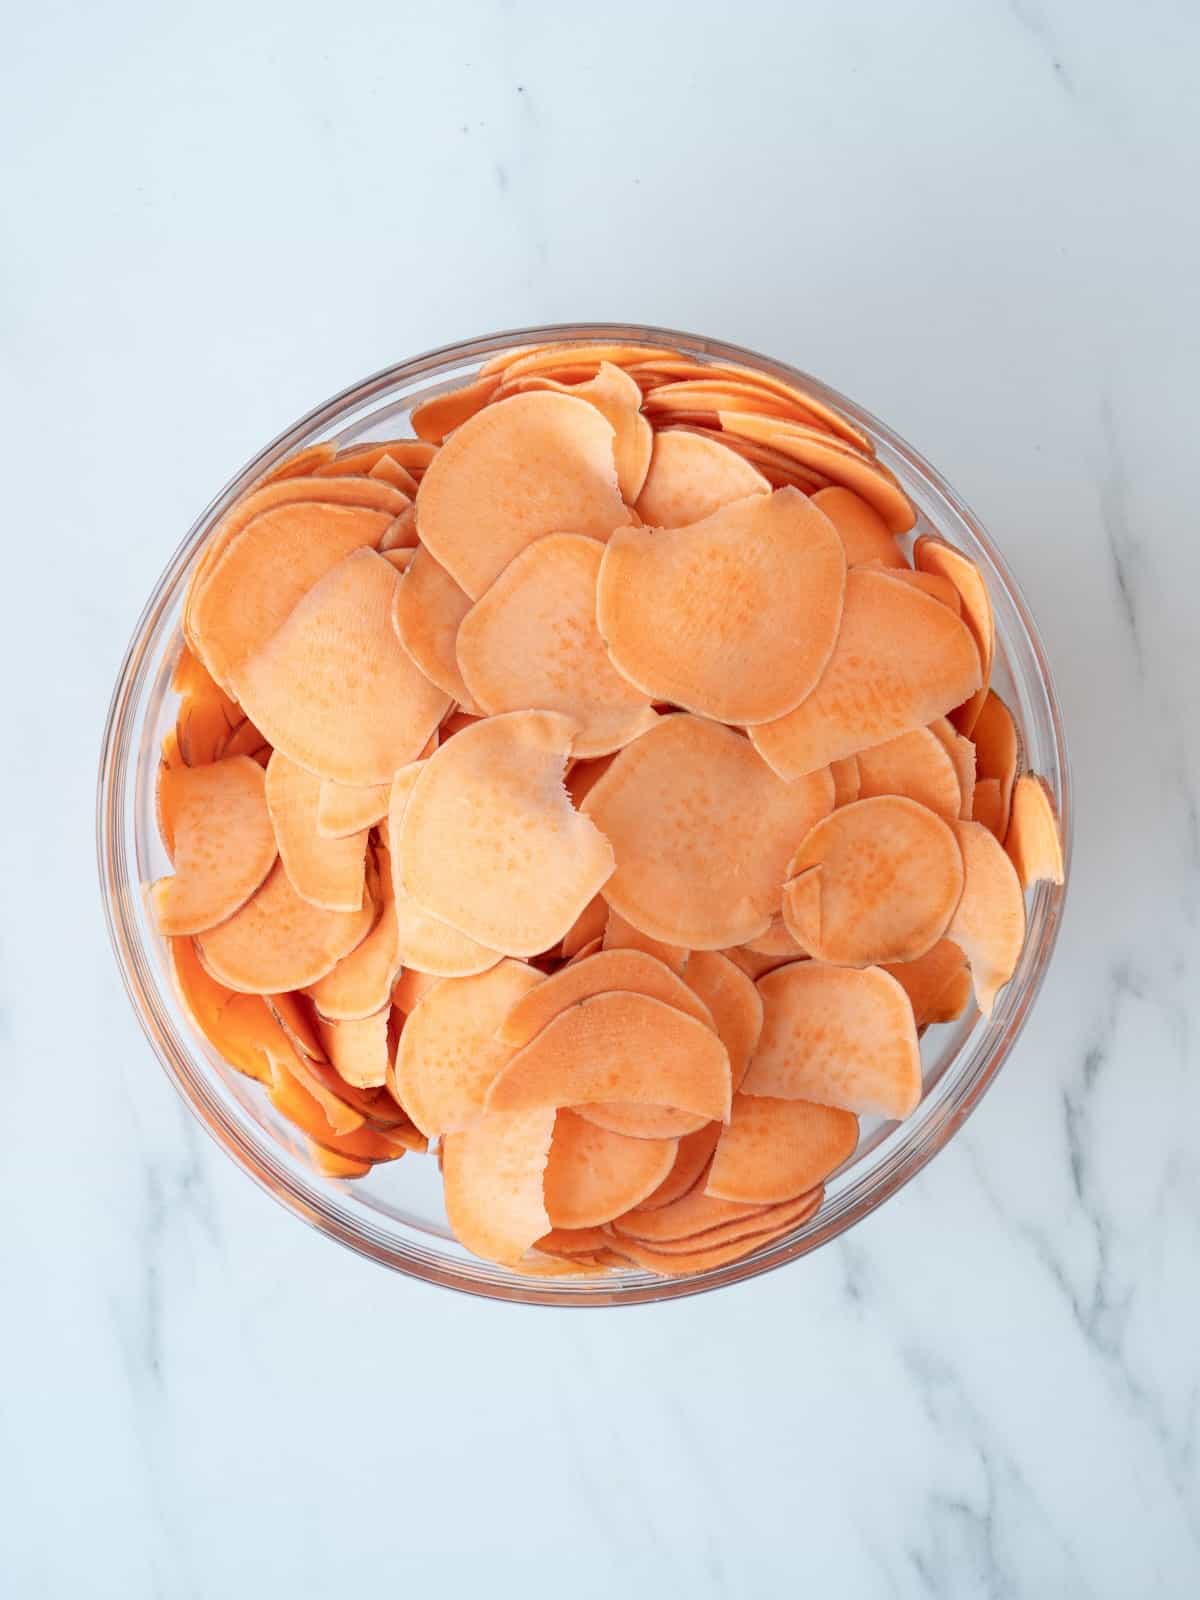 A large glass mixing bowl with thinly sliced sweet potato chips.